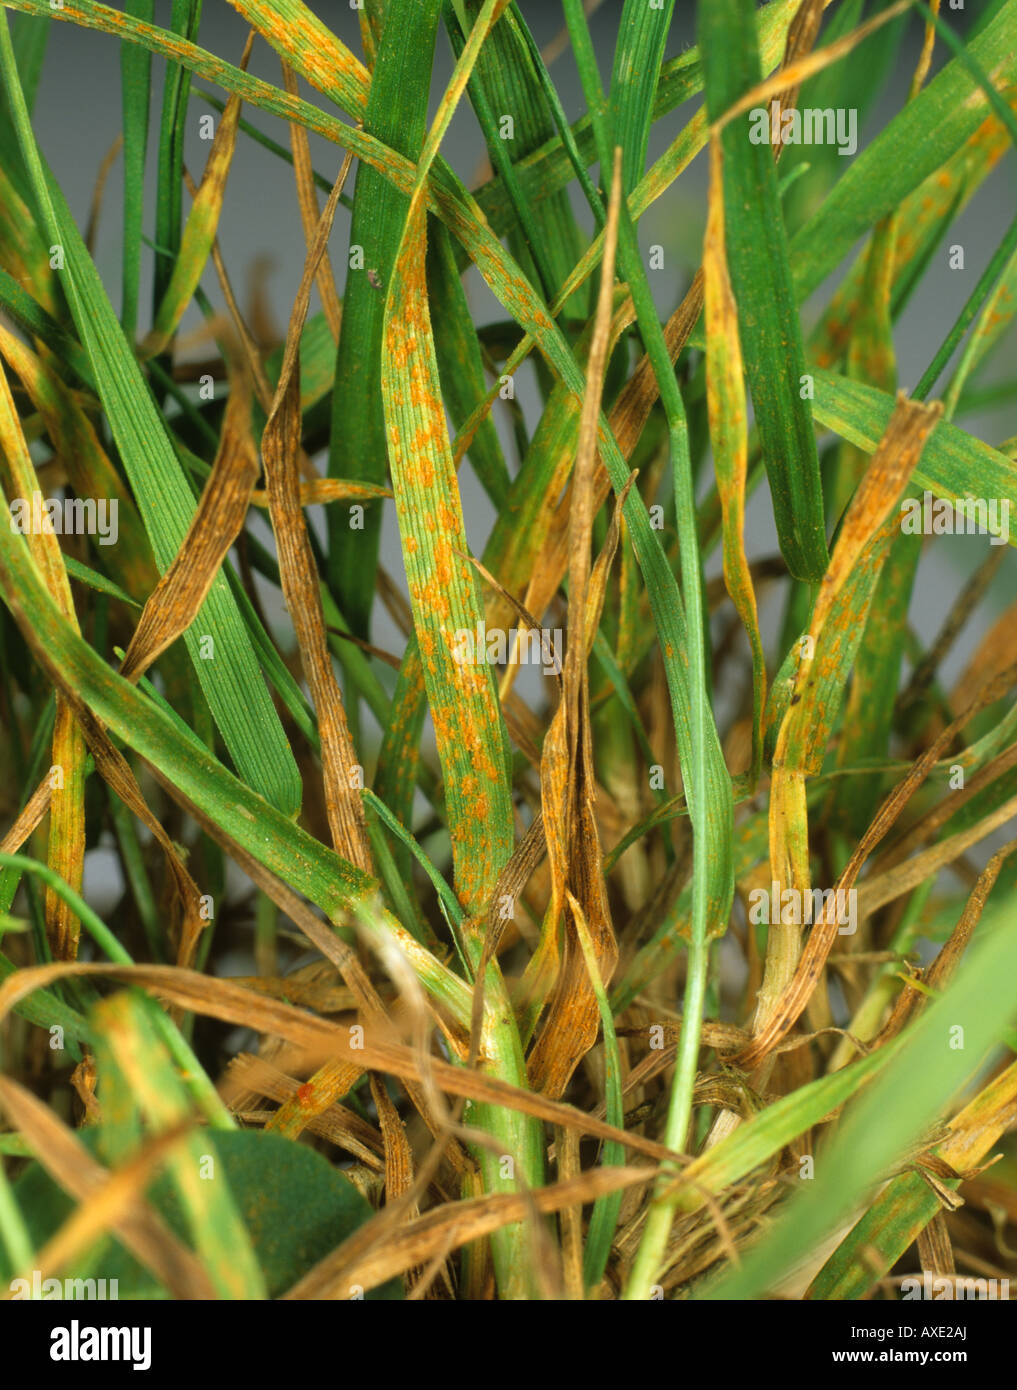 Leaf rust Puccinia poarum infection on lawn meadow grass Poa sp Stock Photo